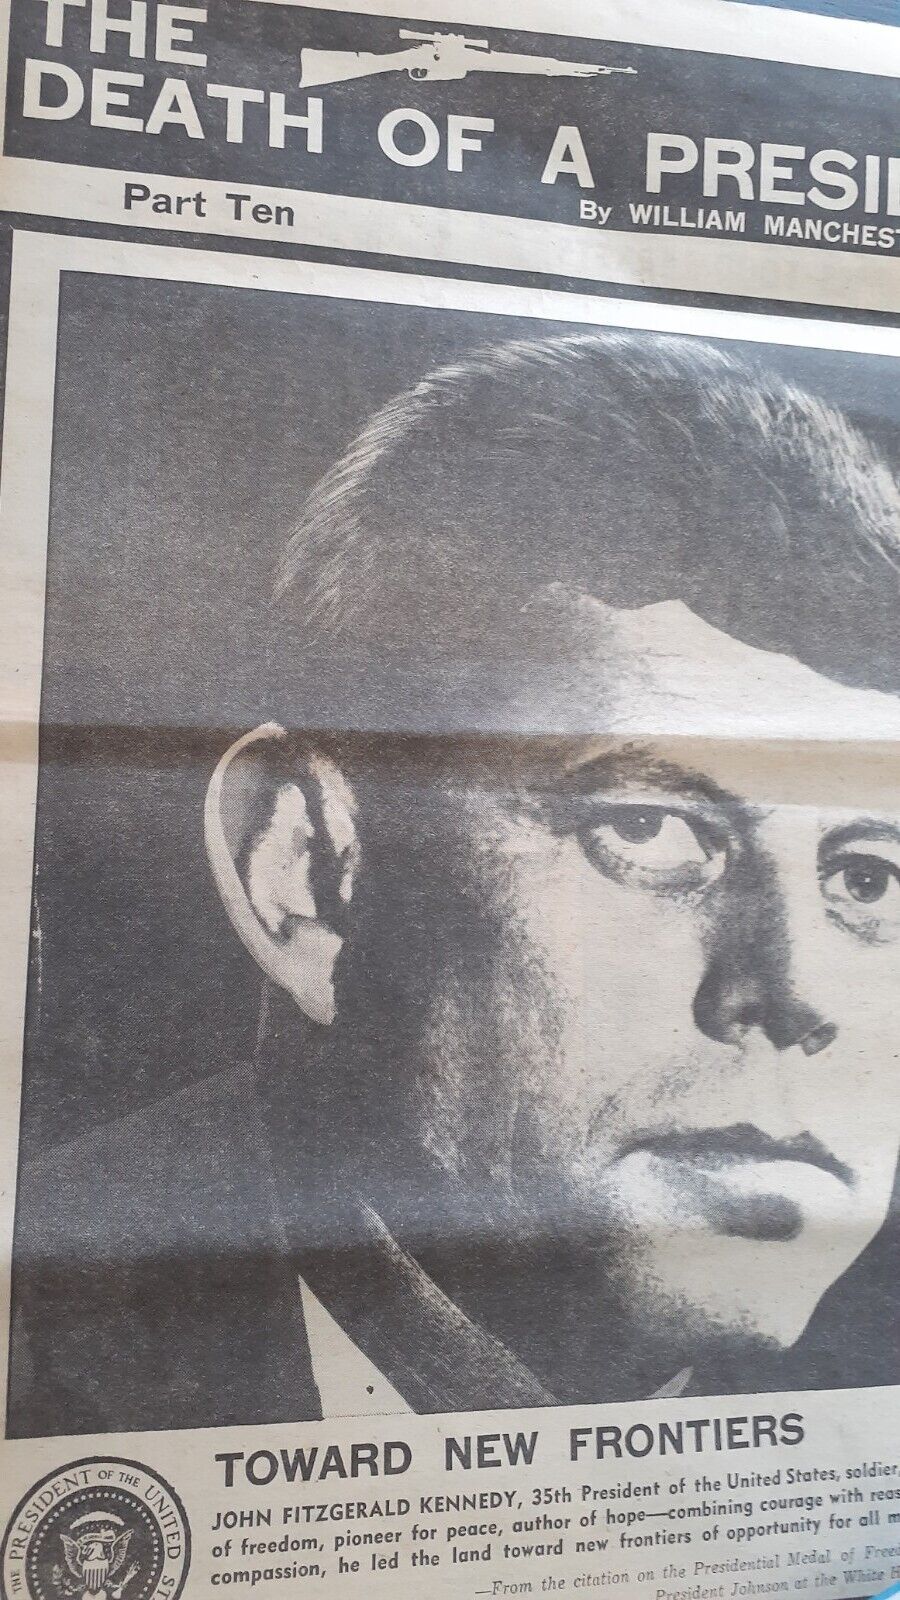  Vintage PRESIDENT KENNEDY - SPECIAL EDITION THE SUN NEWSPAPER 16 FEB 1967